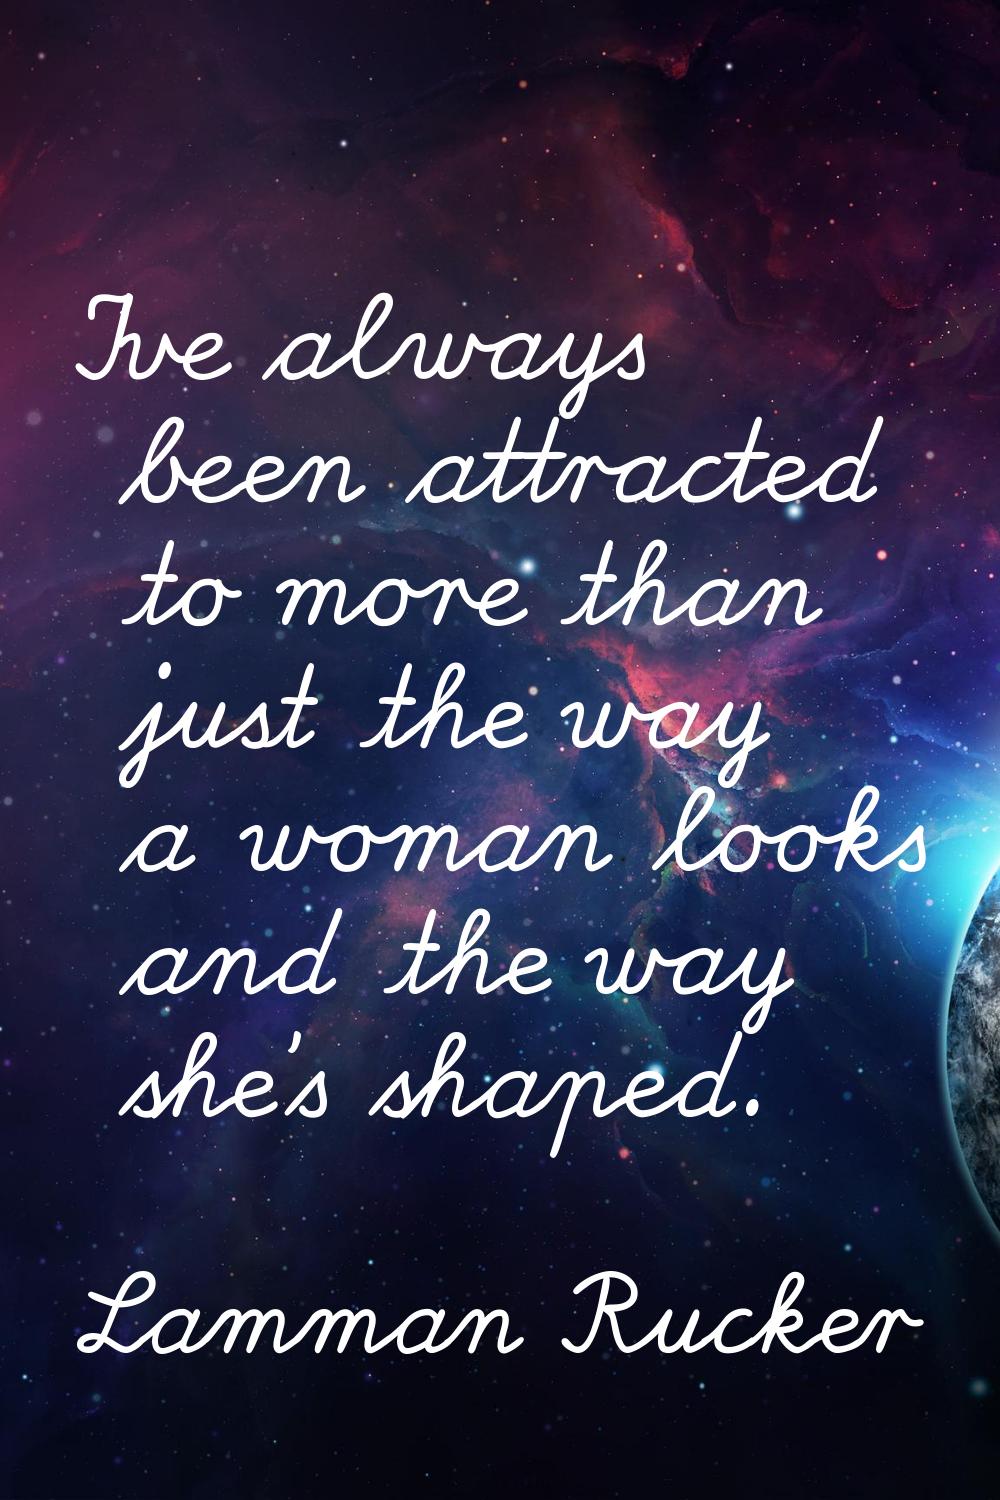 I've always been attracted to more than just the way a woman looks and the way she's shaped.